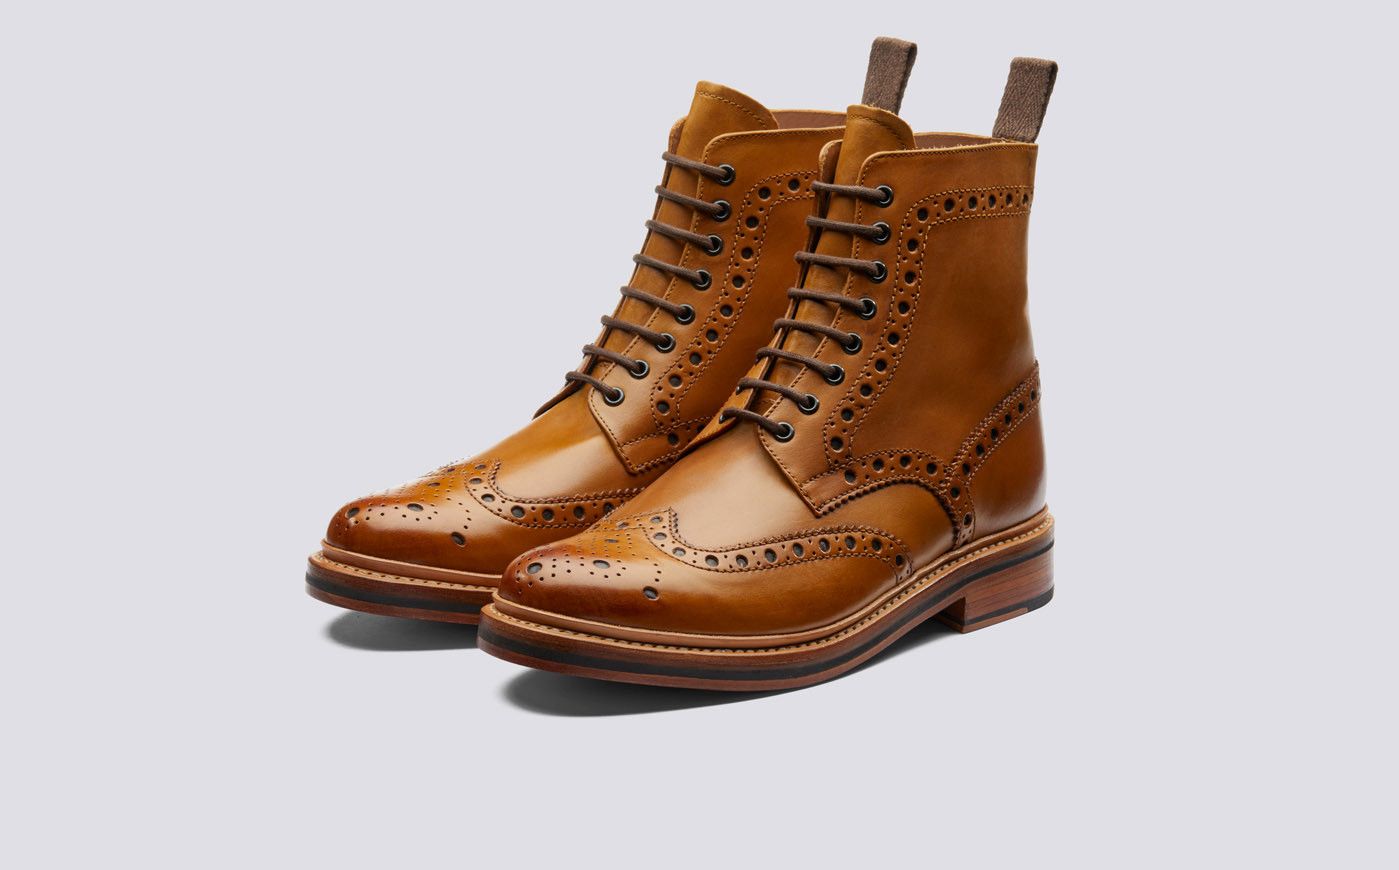 mens leisure boots